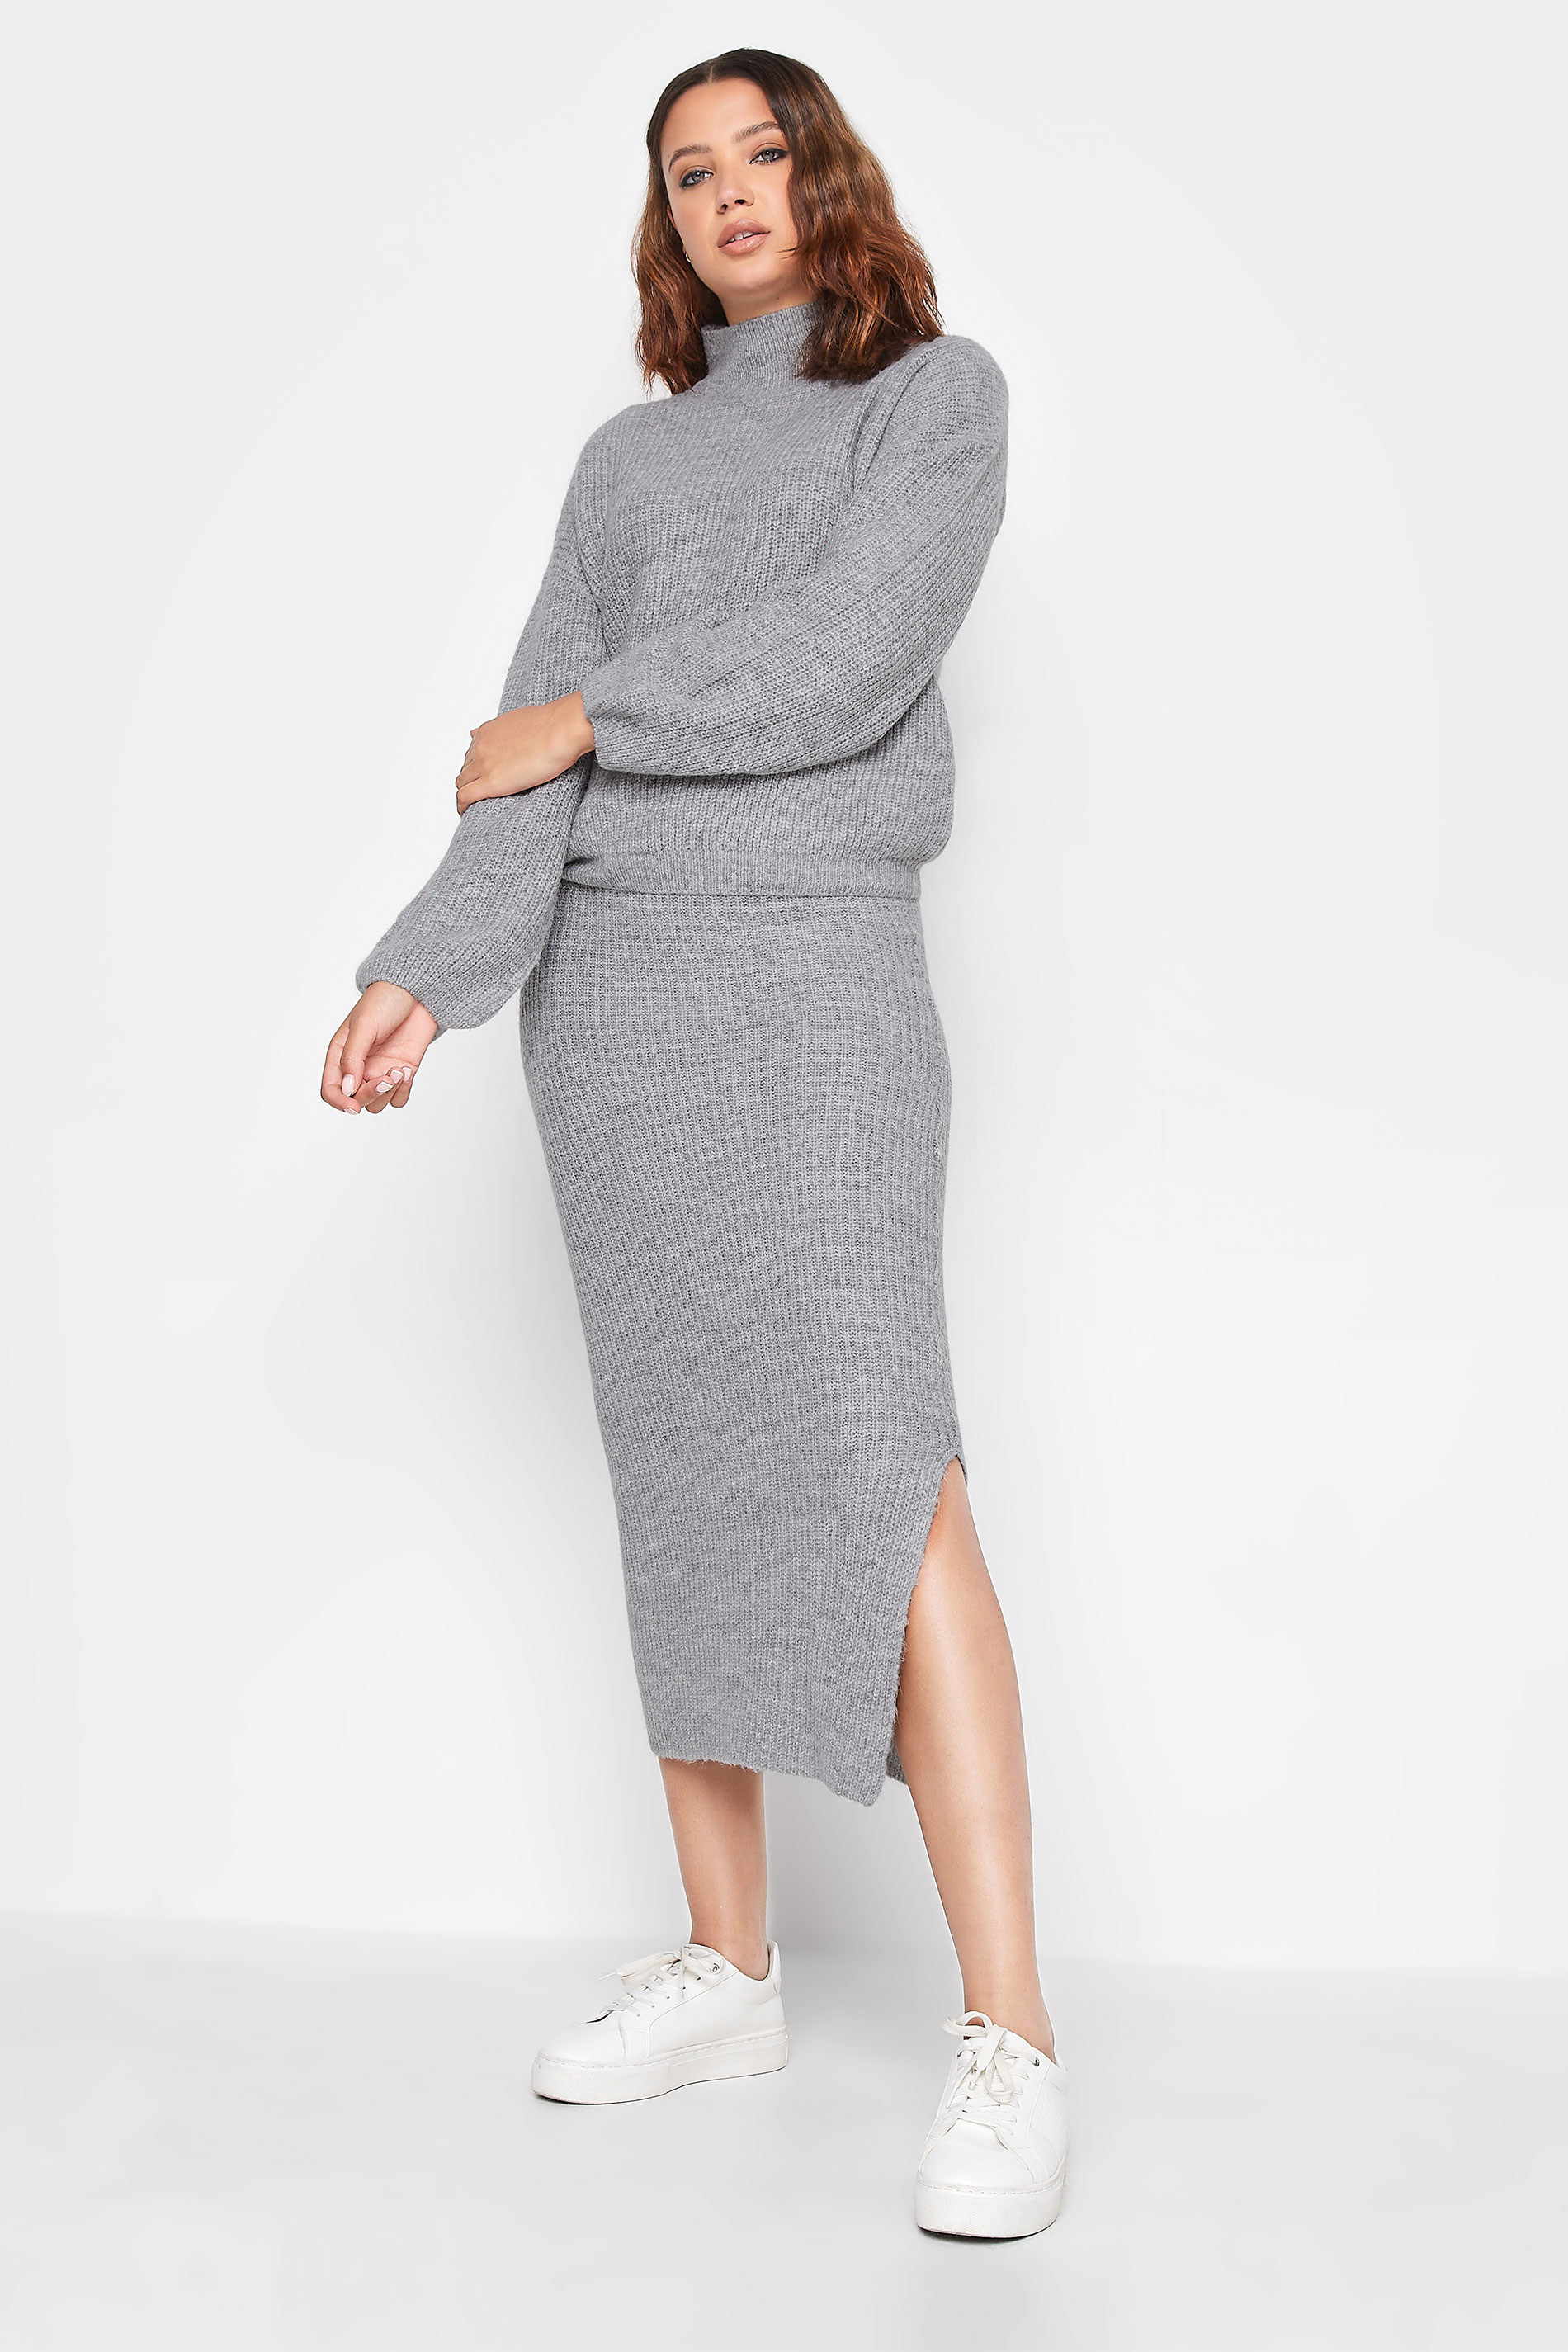 LTS Tall Grey Funnel Neck Knitted Jumper | Long Tall Sally  2